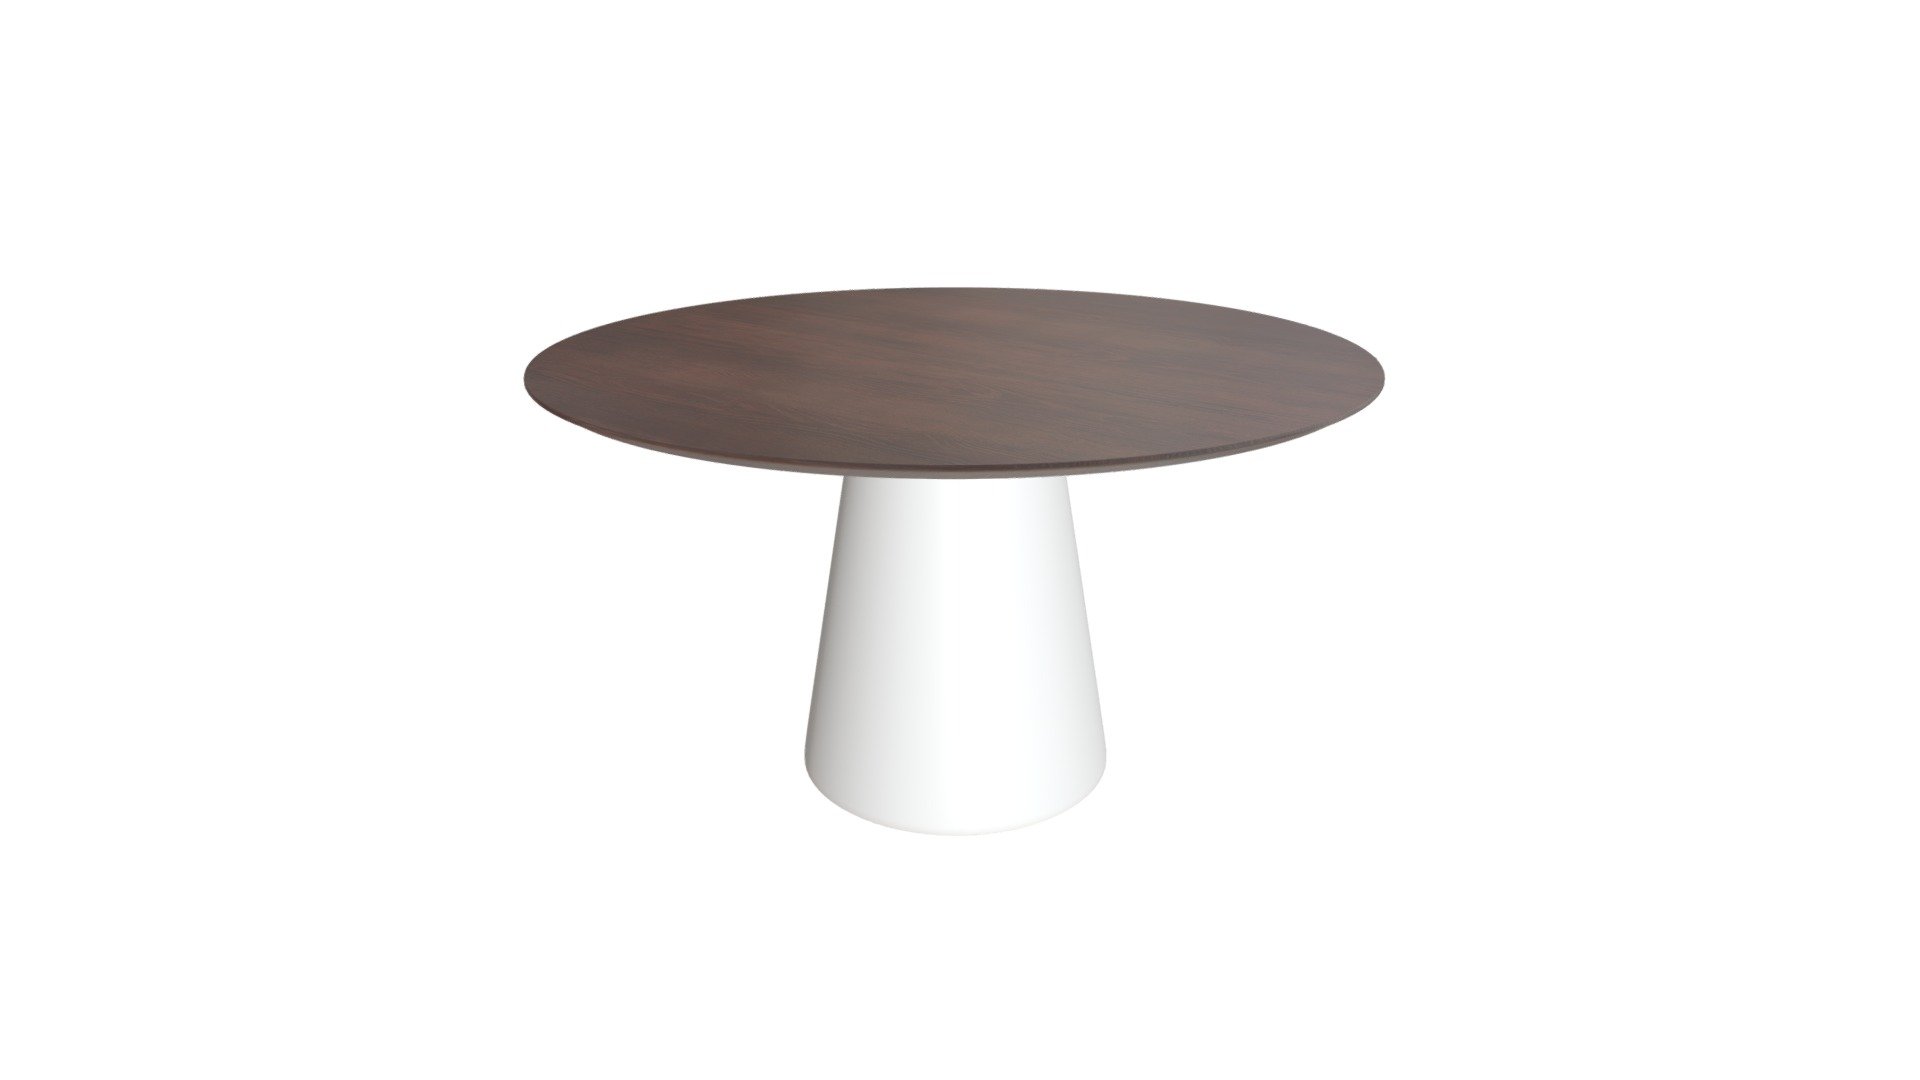 https://zuomod.com/query-dining-table

Slim round design in warm walnut veneer top and accented by matte white column base make the Query dining table the new look of Mid-Century Modern dining rooms and modern office conference room tables across the globe 3d model